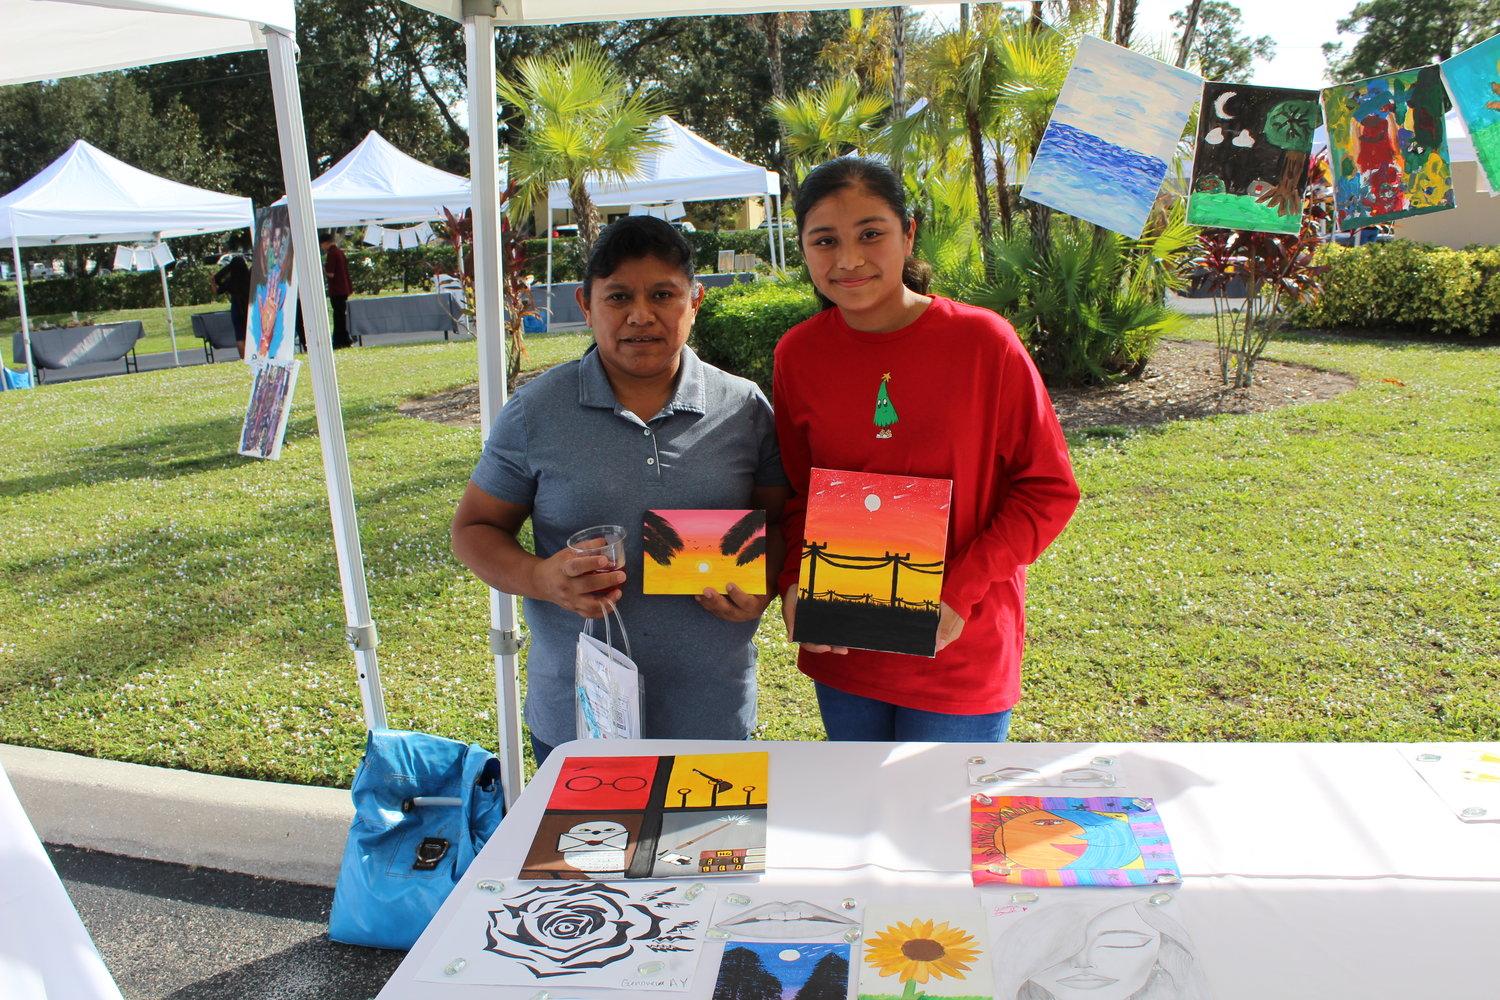 Assisted by her mother, Immokalee Foundation student Genoveva A. shows her artwork.